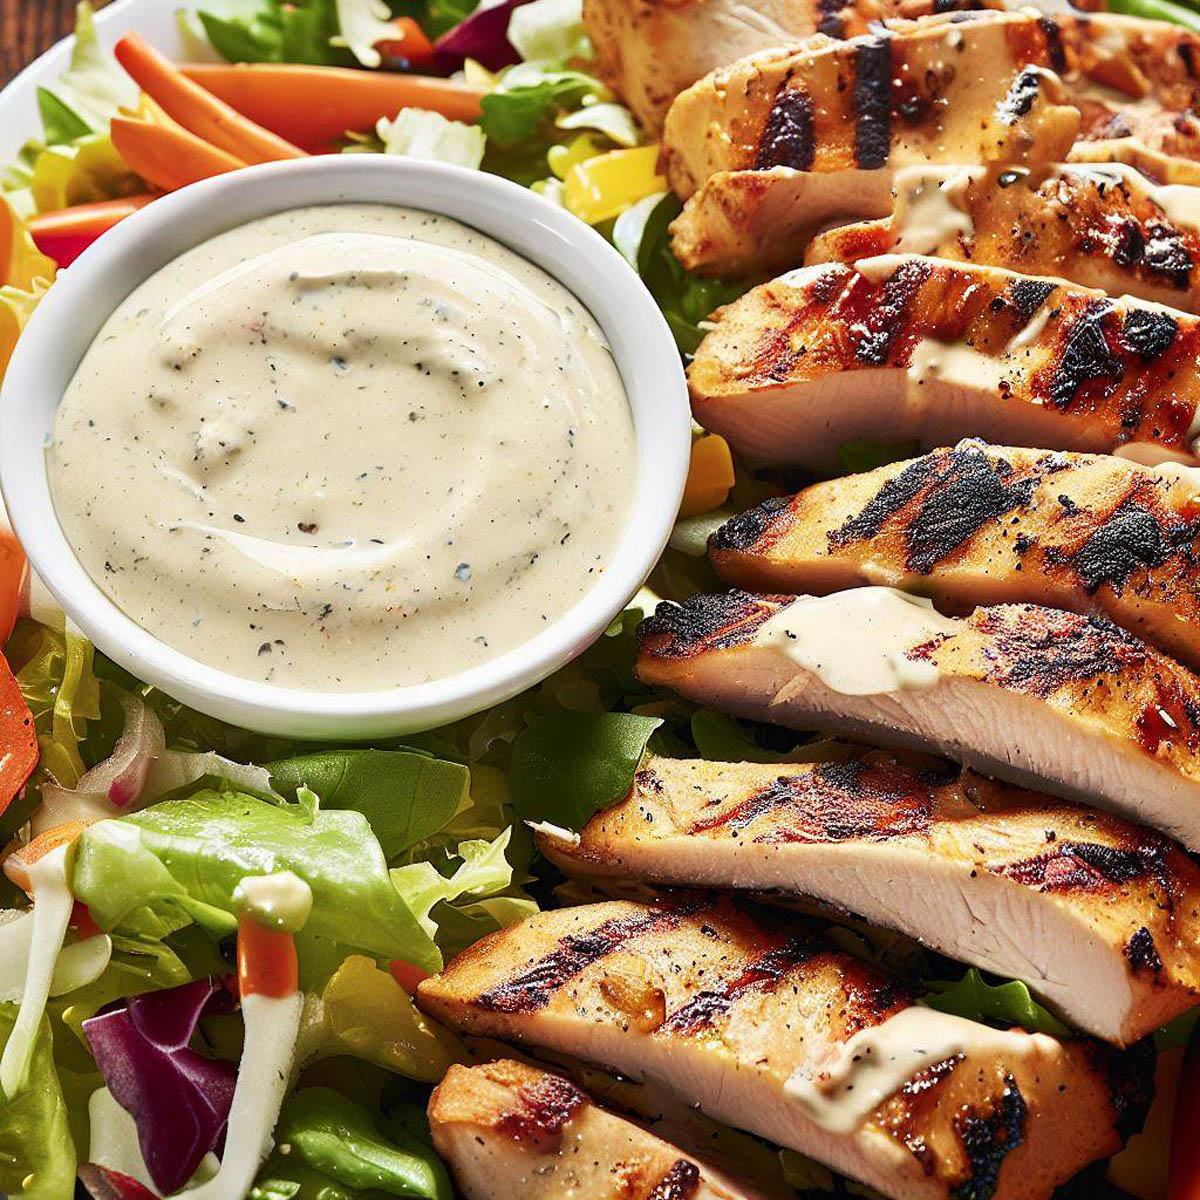 A vibrant vegetable salad adorned with golden grilled chicken slices and generously drizzled with creamy Texas Roadhouse Ranch dressing.